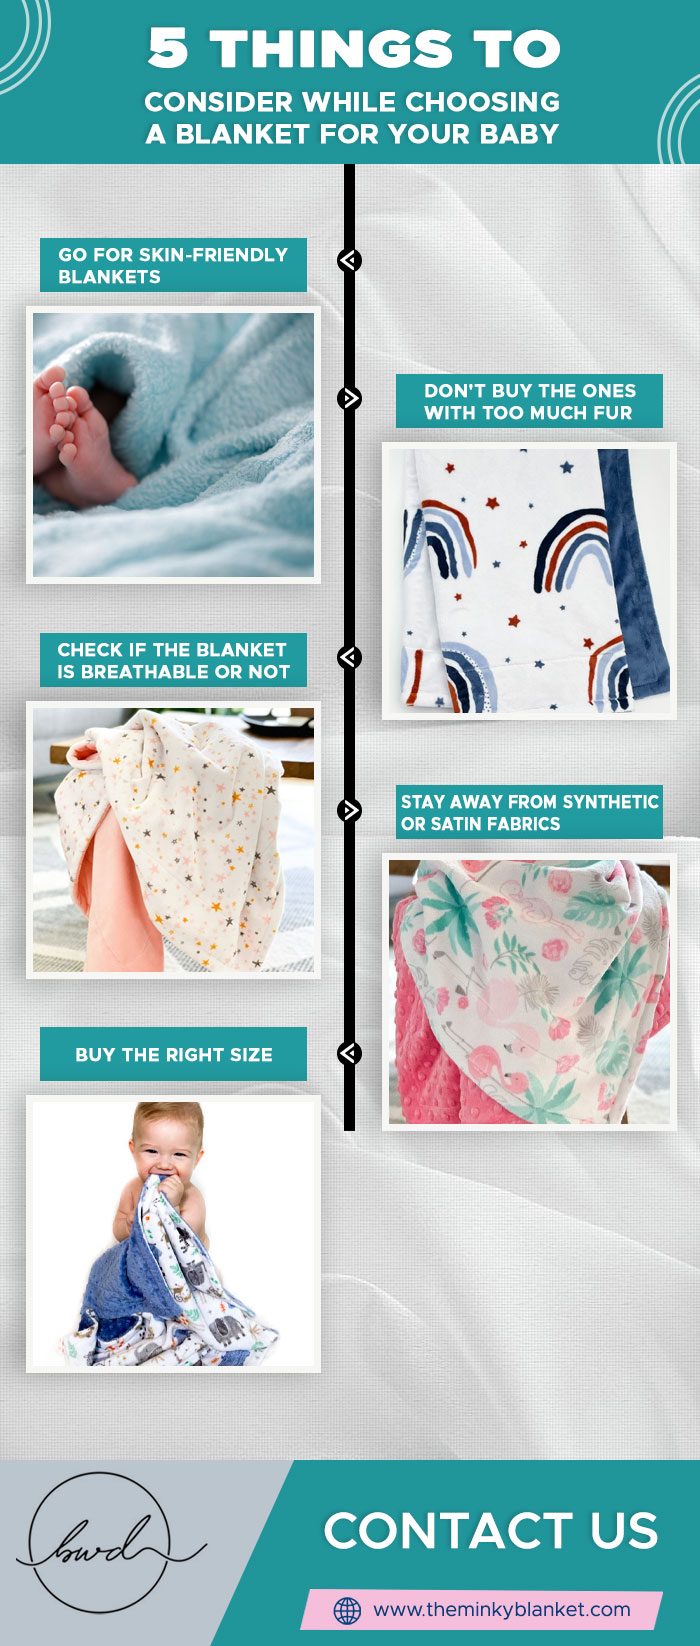 5 Things To Consider While Choosing A Blanket For Your Baby - Extraimage.org